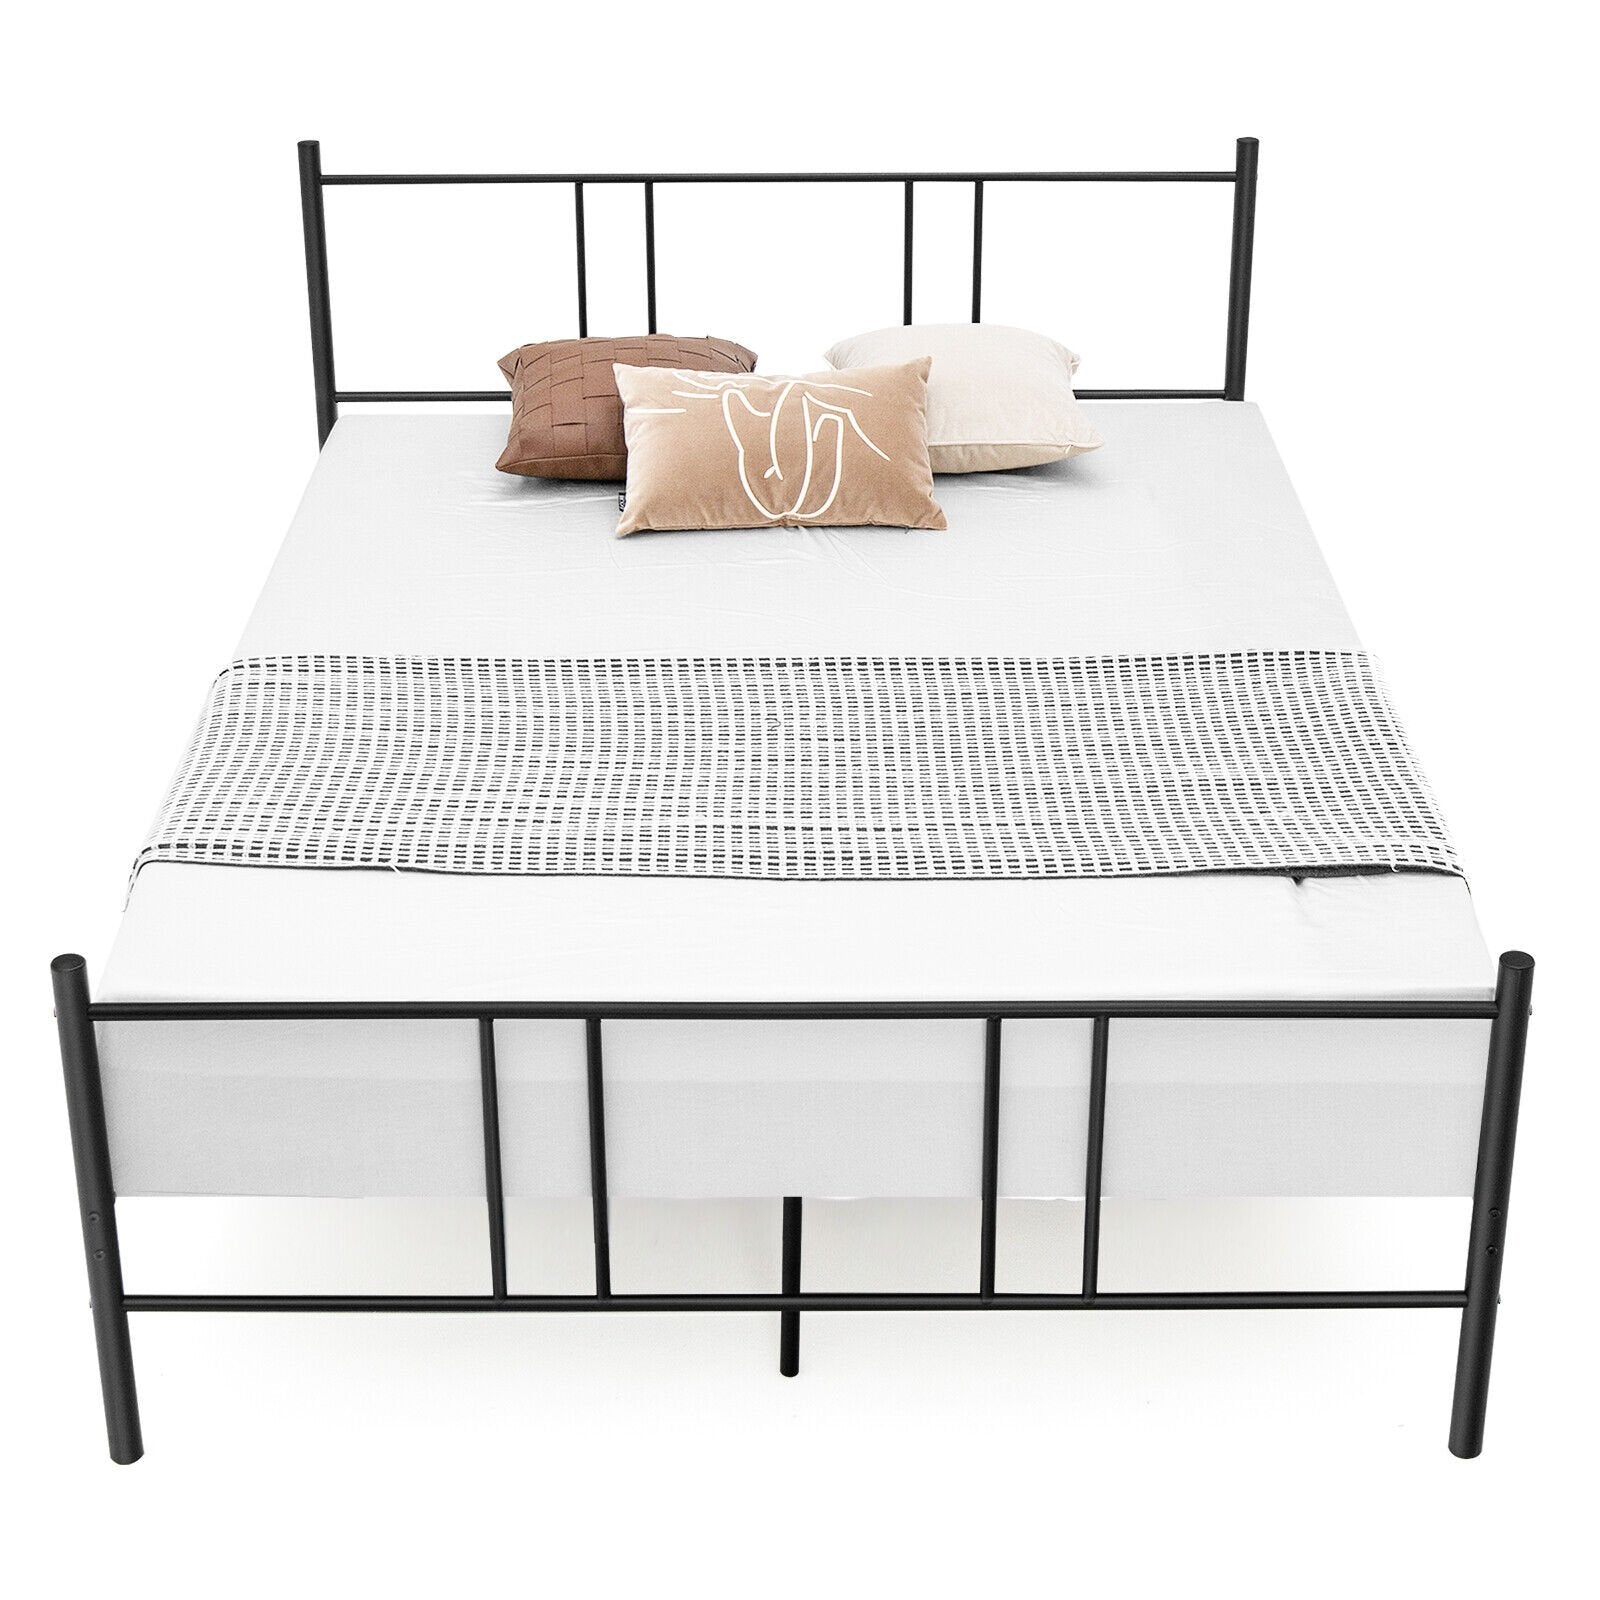 Full/Queen Size Platform Bed Frame with High Headboard-Queen Size, Black - Gallery Canada